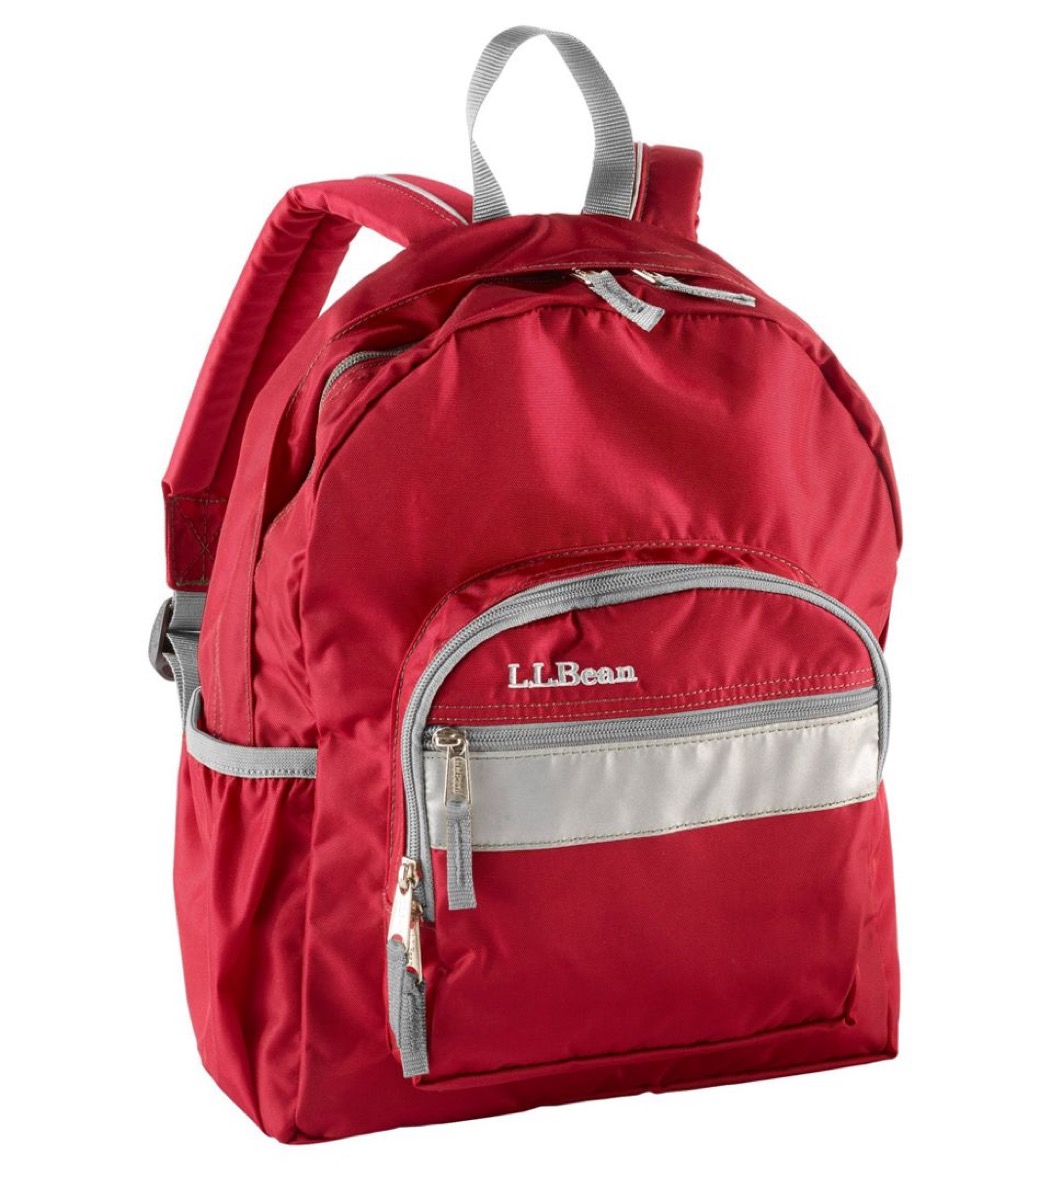 vintage ll bean backpack coolest school accessory every year